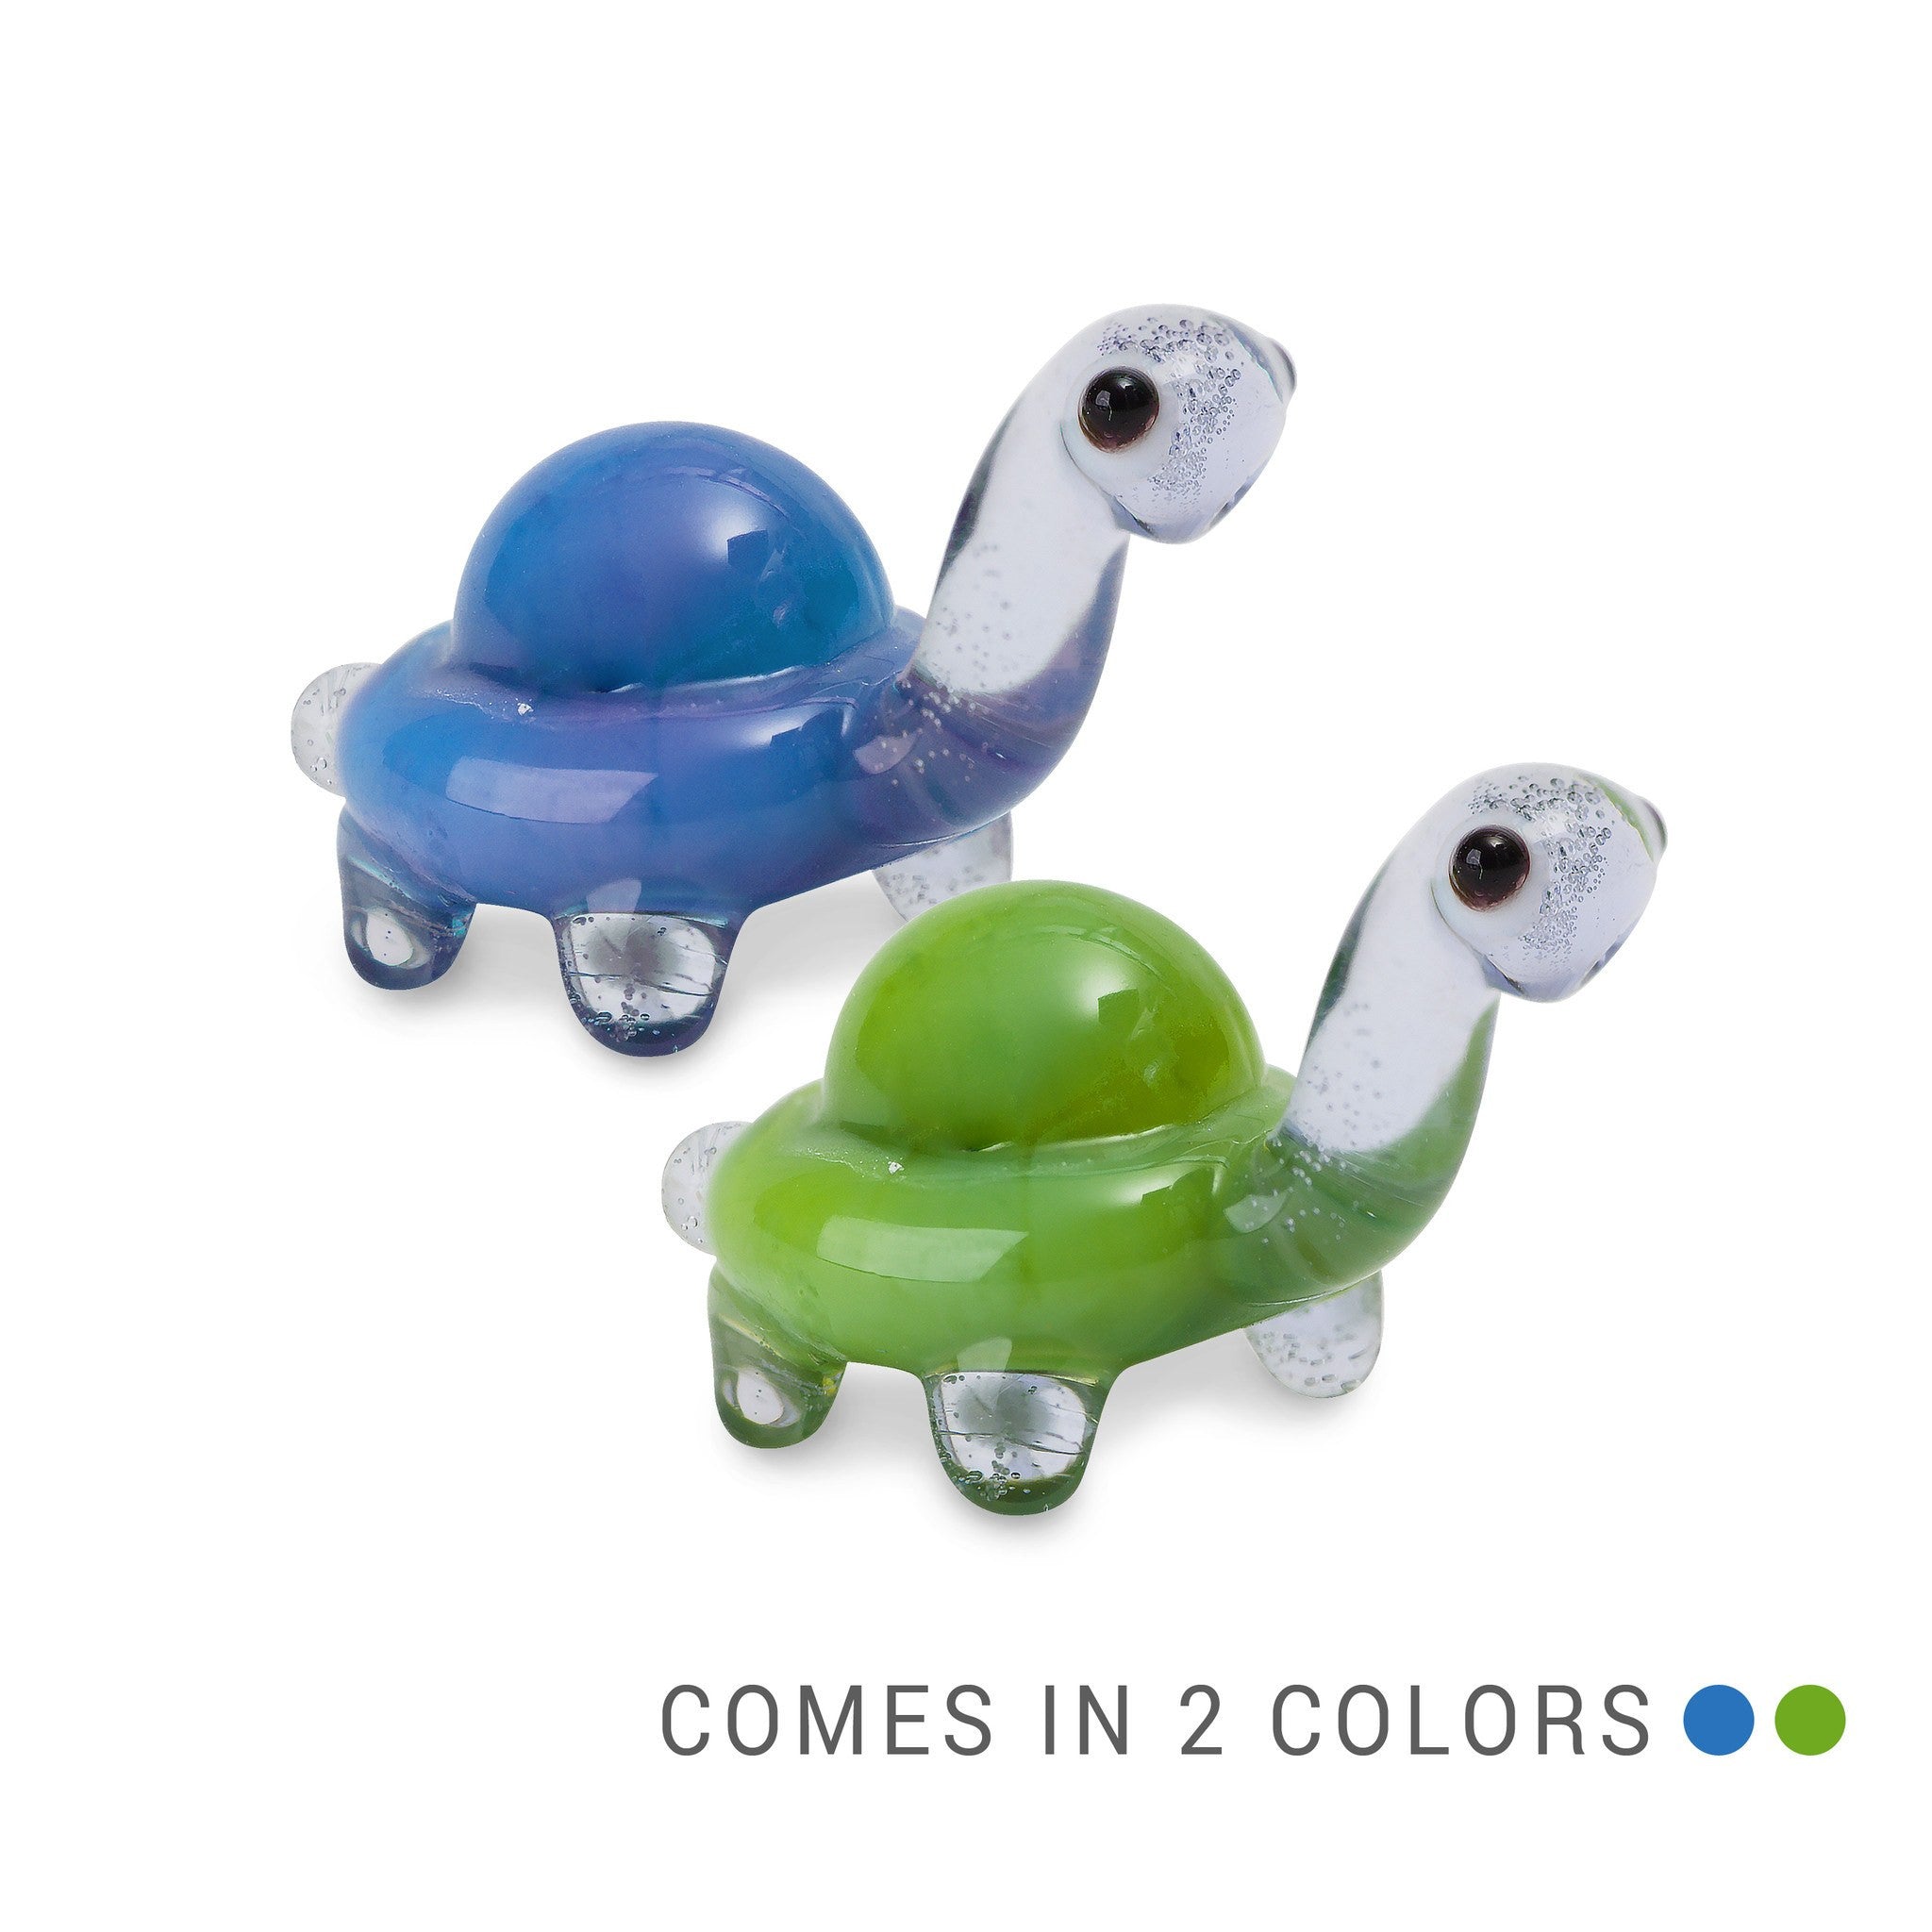 DOV the turtle (in Tynies Collector's Frame) Miniature glass figurines 